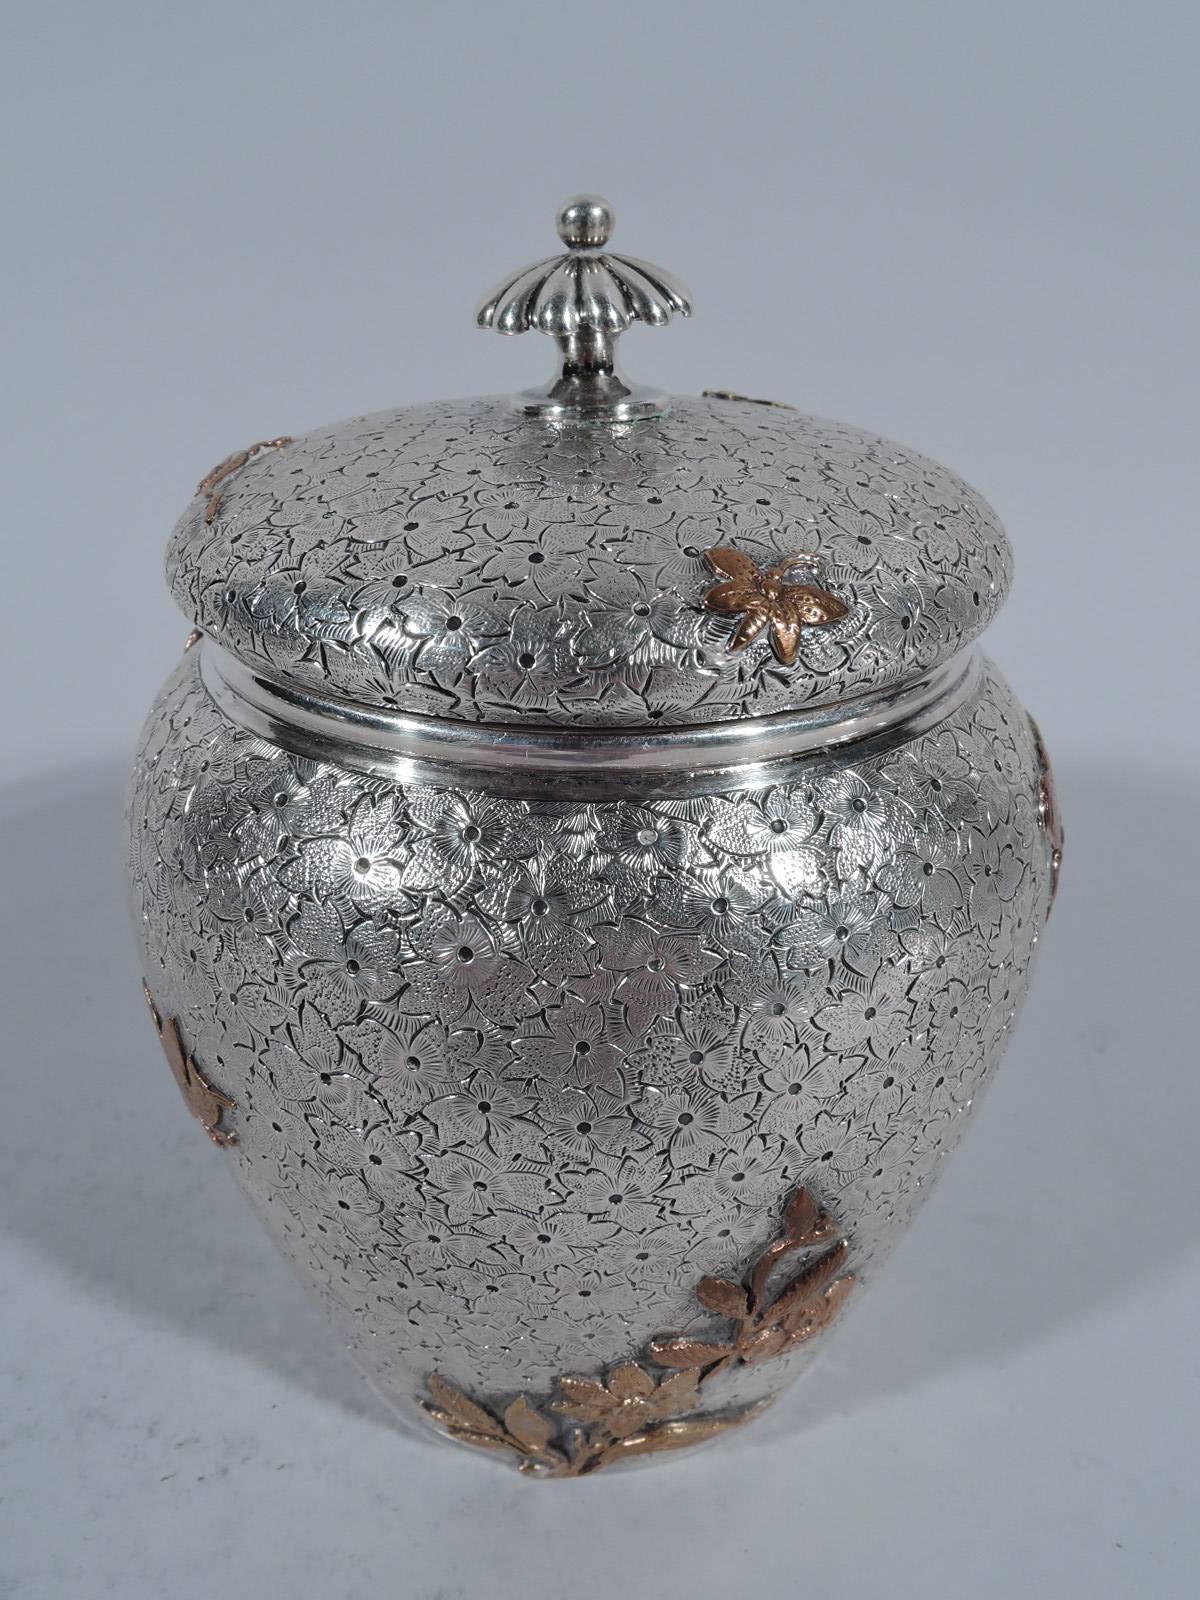 Unusual sterling silver and mixed metal tea caddy. Made by Dominick & Haff in New York in 1880. Ovoid with bun cover and lobed finial. Engraved and stippled floral ground with copper and gold appliques: butterflies, bird, lizard, grain heads,